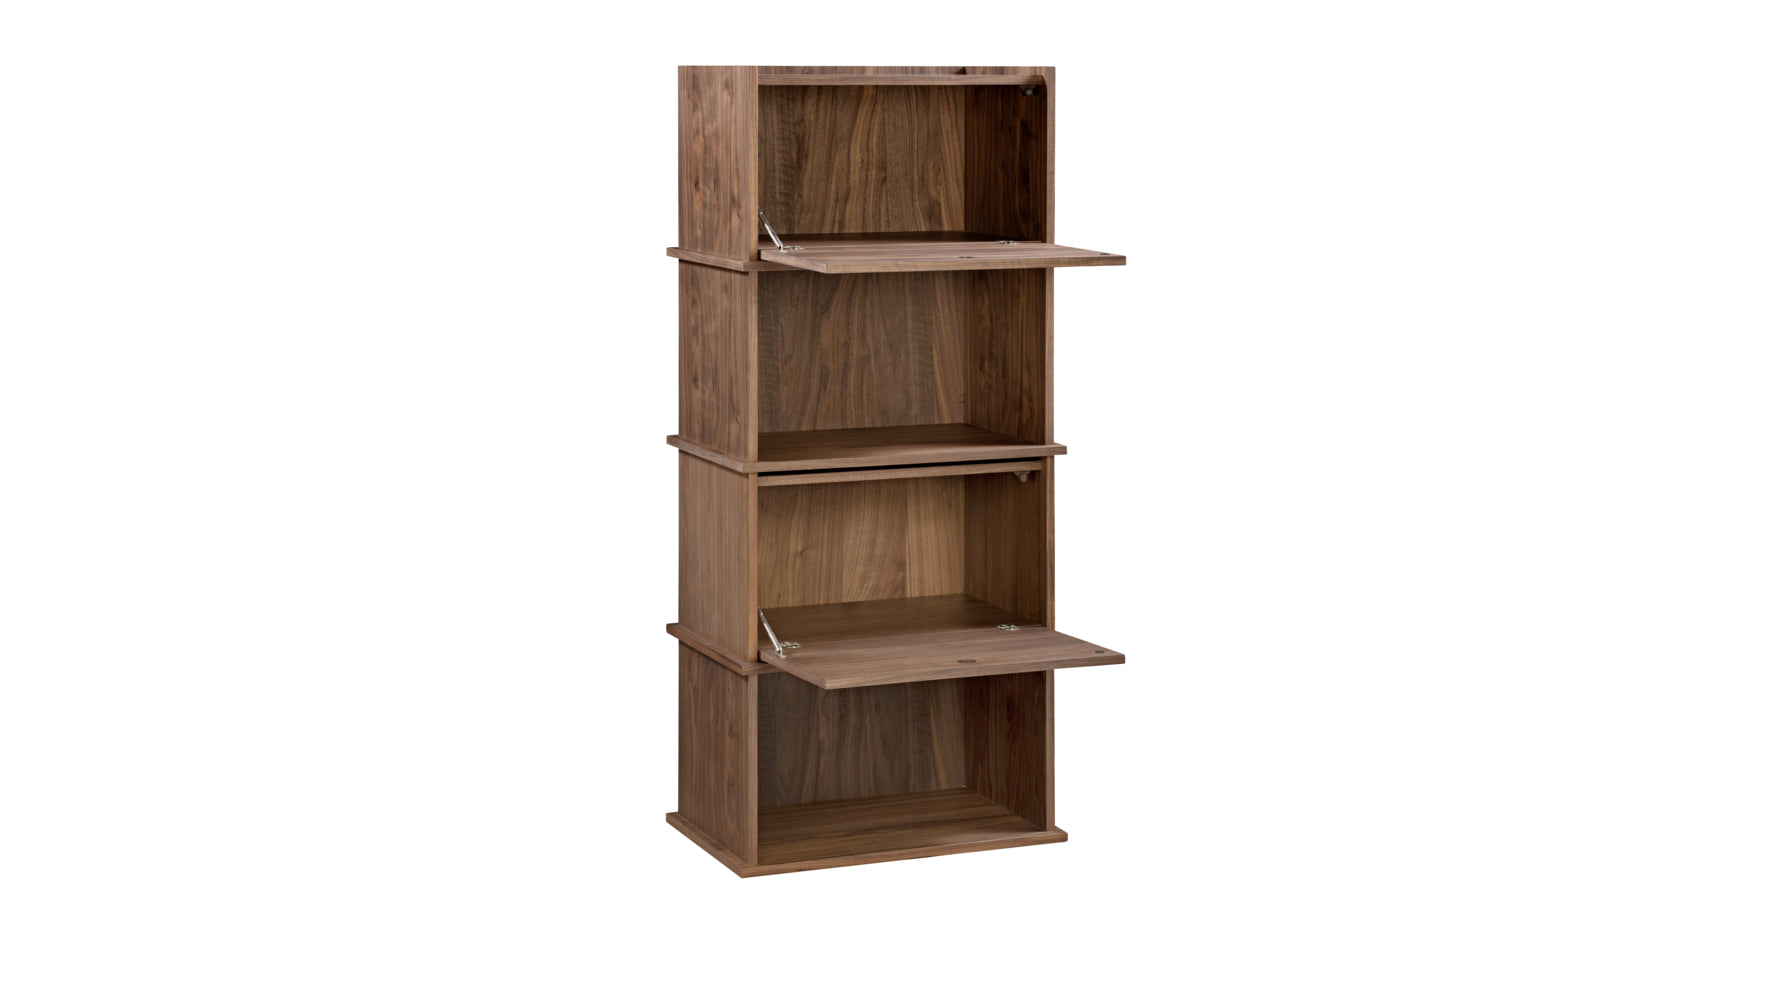 Keep Stacking Storage System 4-Piece, Open and Closed, Walnut - Image 5